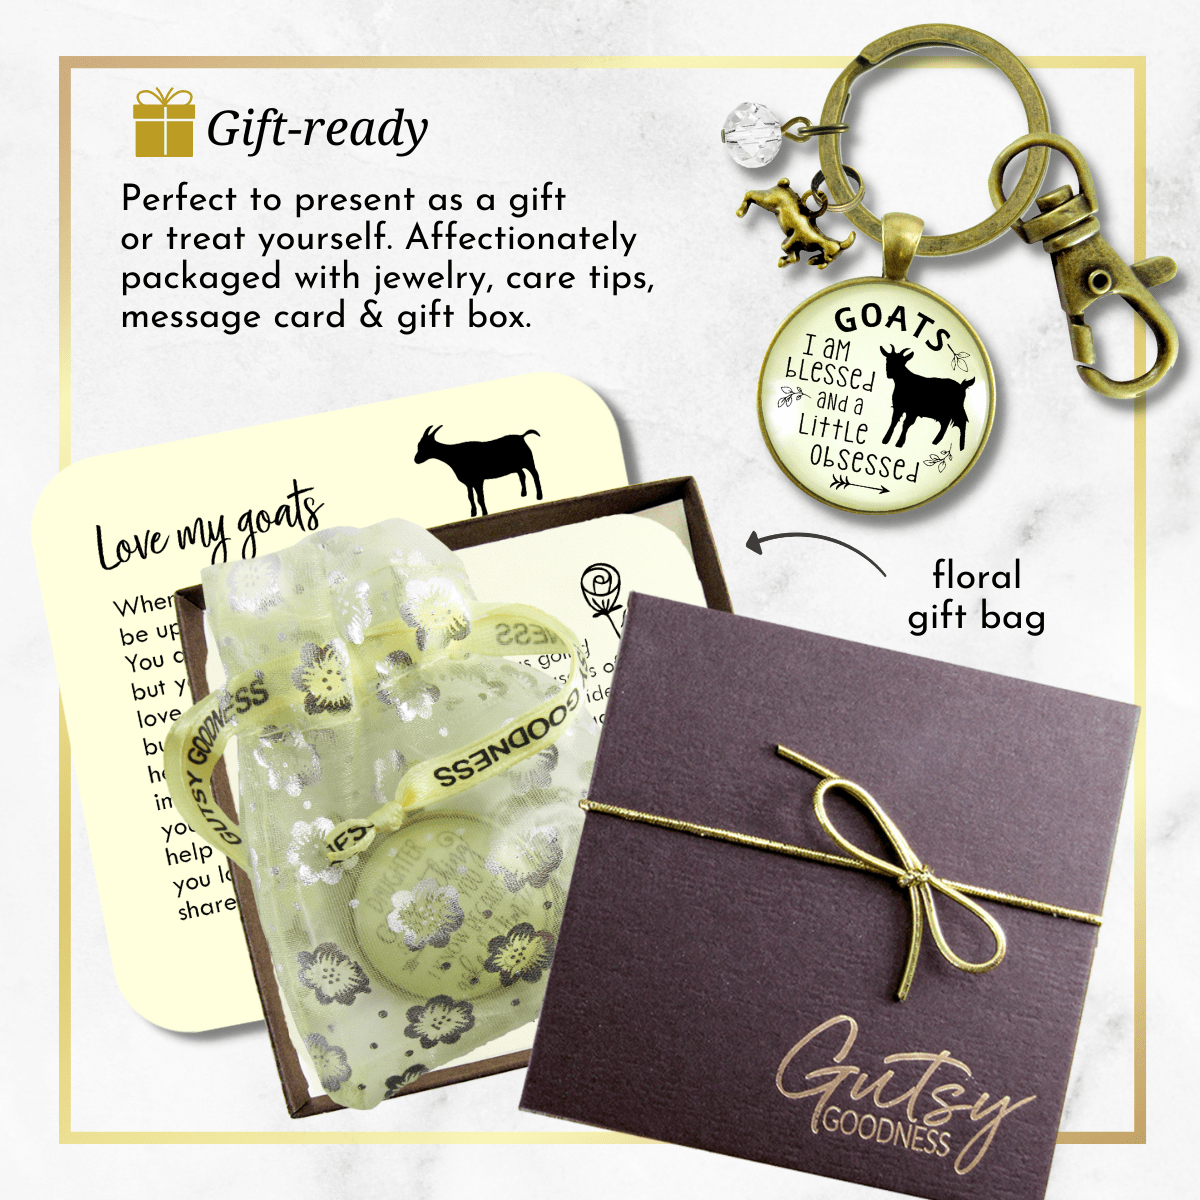 Goat Keychain I Am Blessed Little Obsessed Farm Animal Jewelry Goat Charm Gift - Gutsy Goodness Handmade Jewelry;Goat Keychain I Am Blessed Little Obsessed Farm Animal Jewelry Goat Charm Gift - Gutsy Goodness Handmade Jewelry Gifts